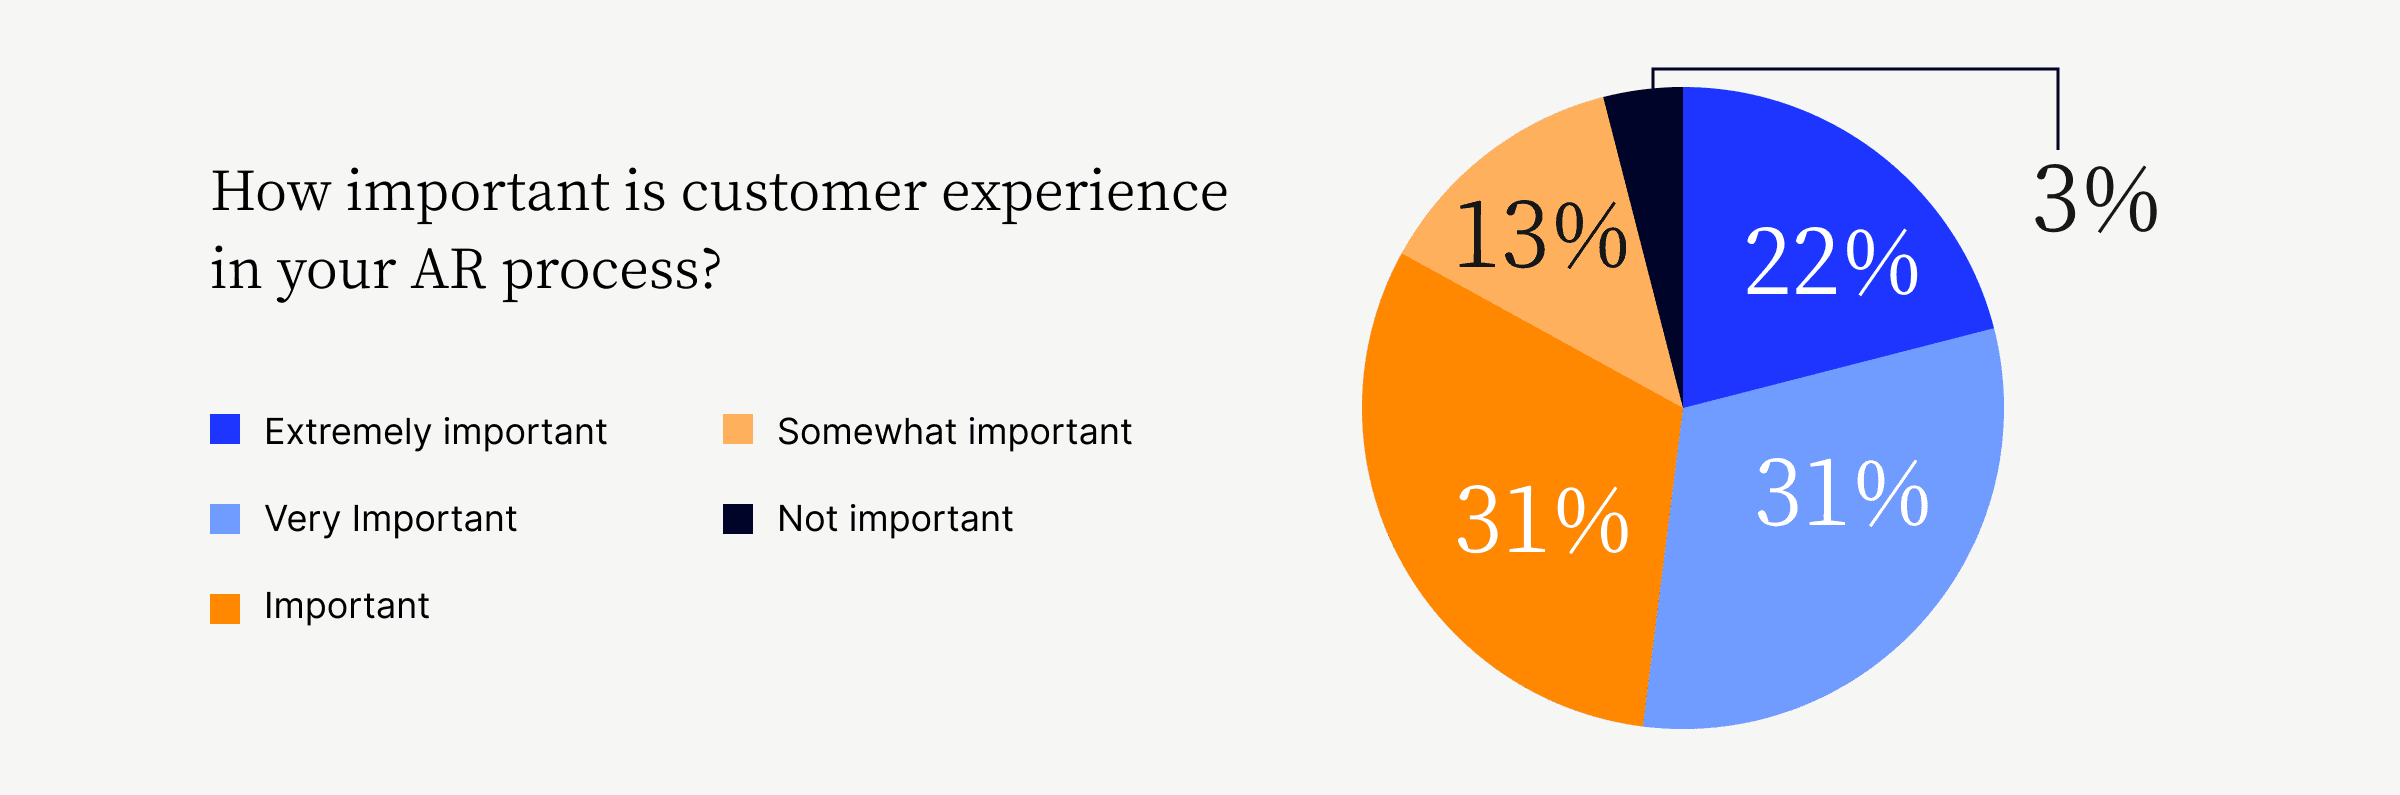 The importance of customer experience in the AR process